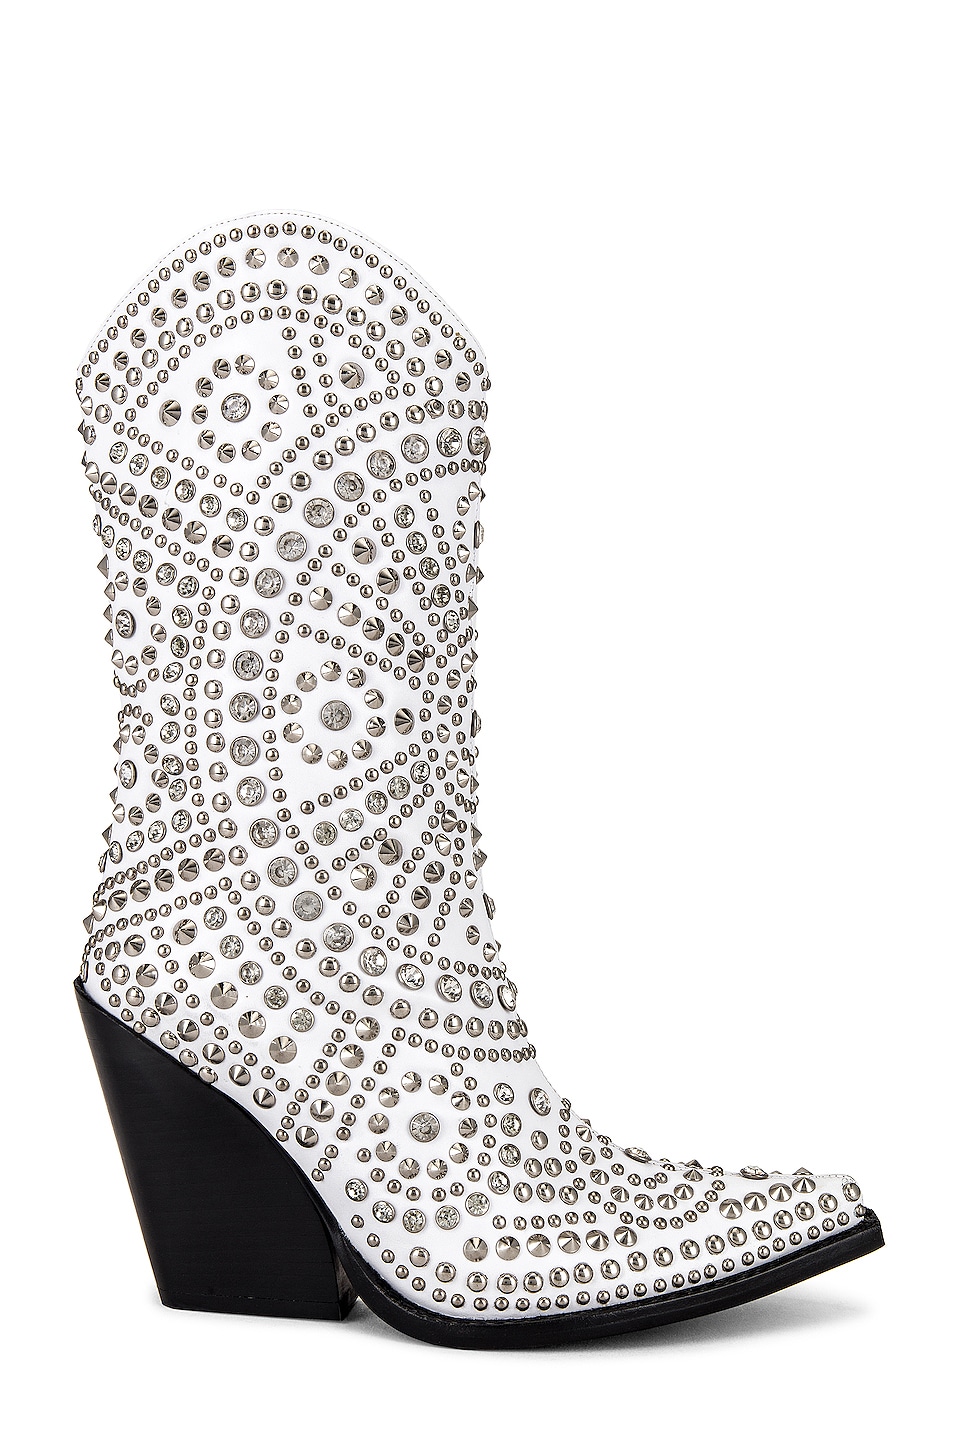 Jeffrey Campbell Studley Boot in White | REVOLVE